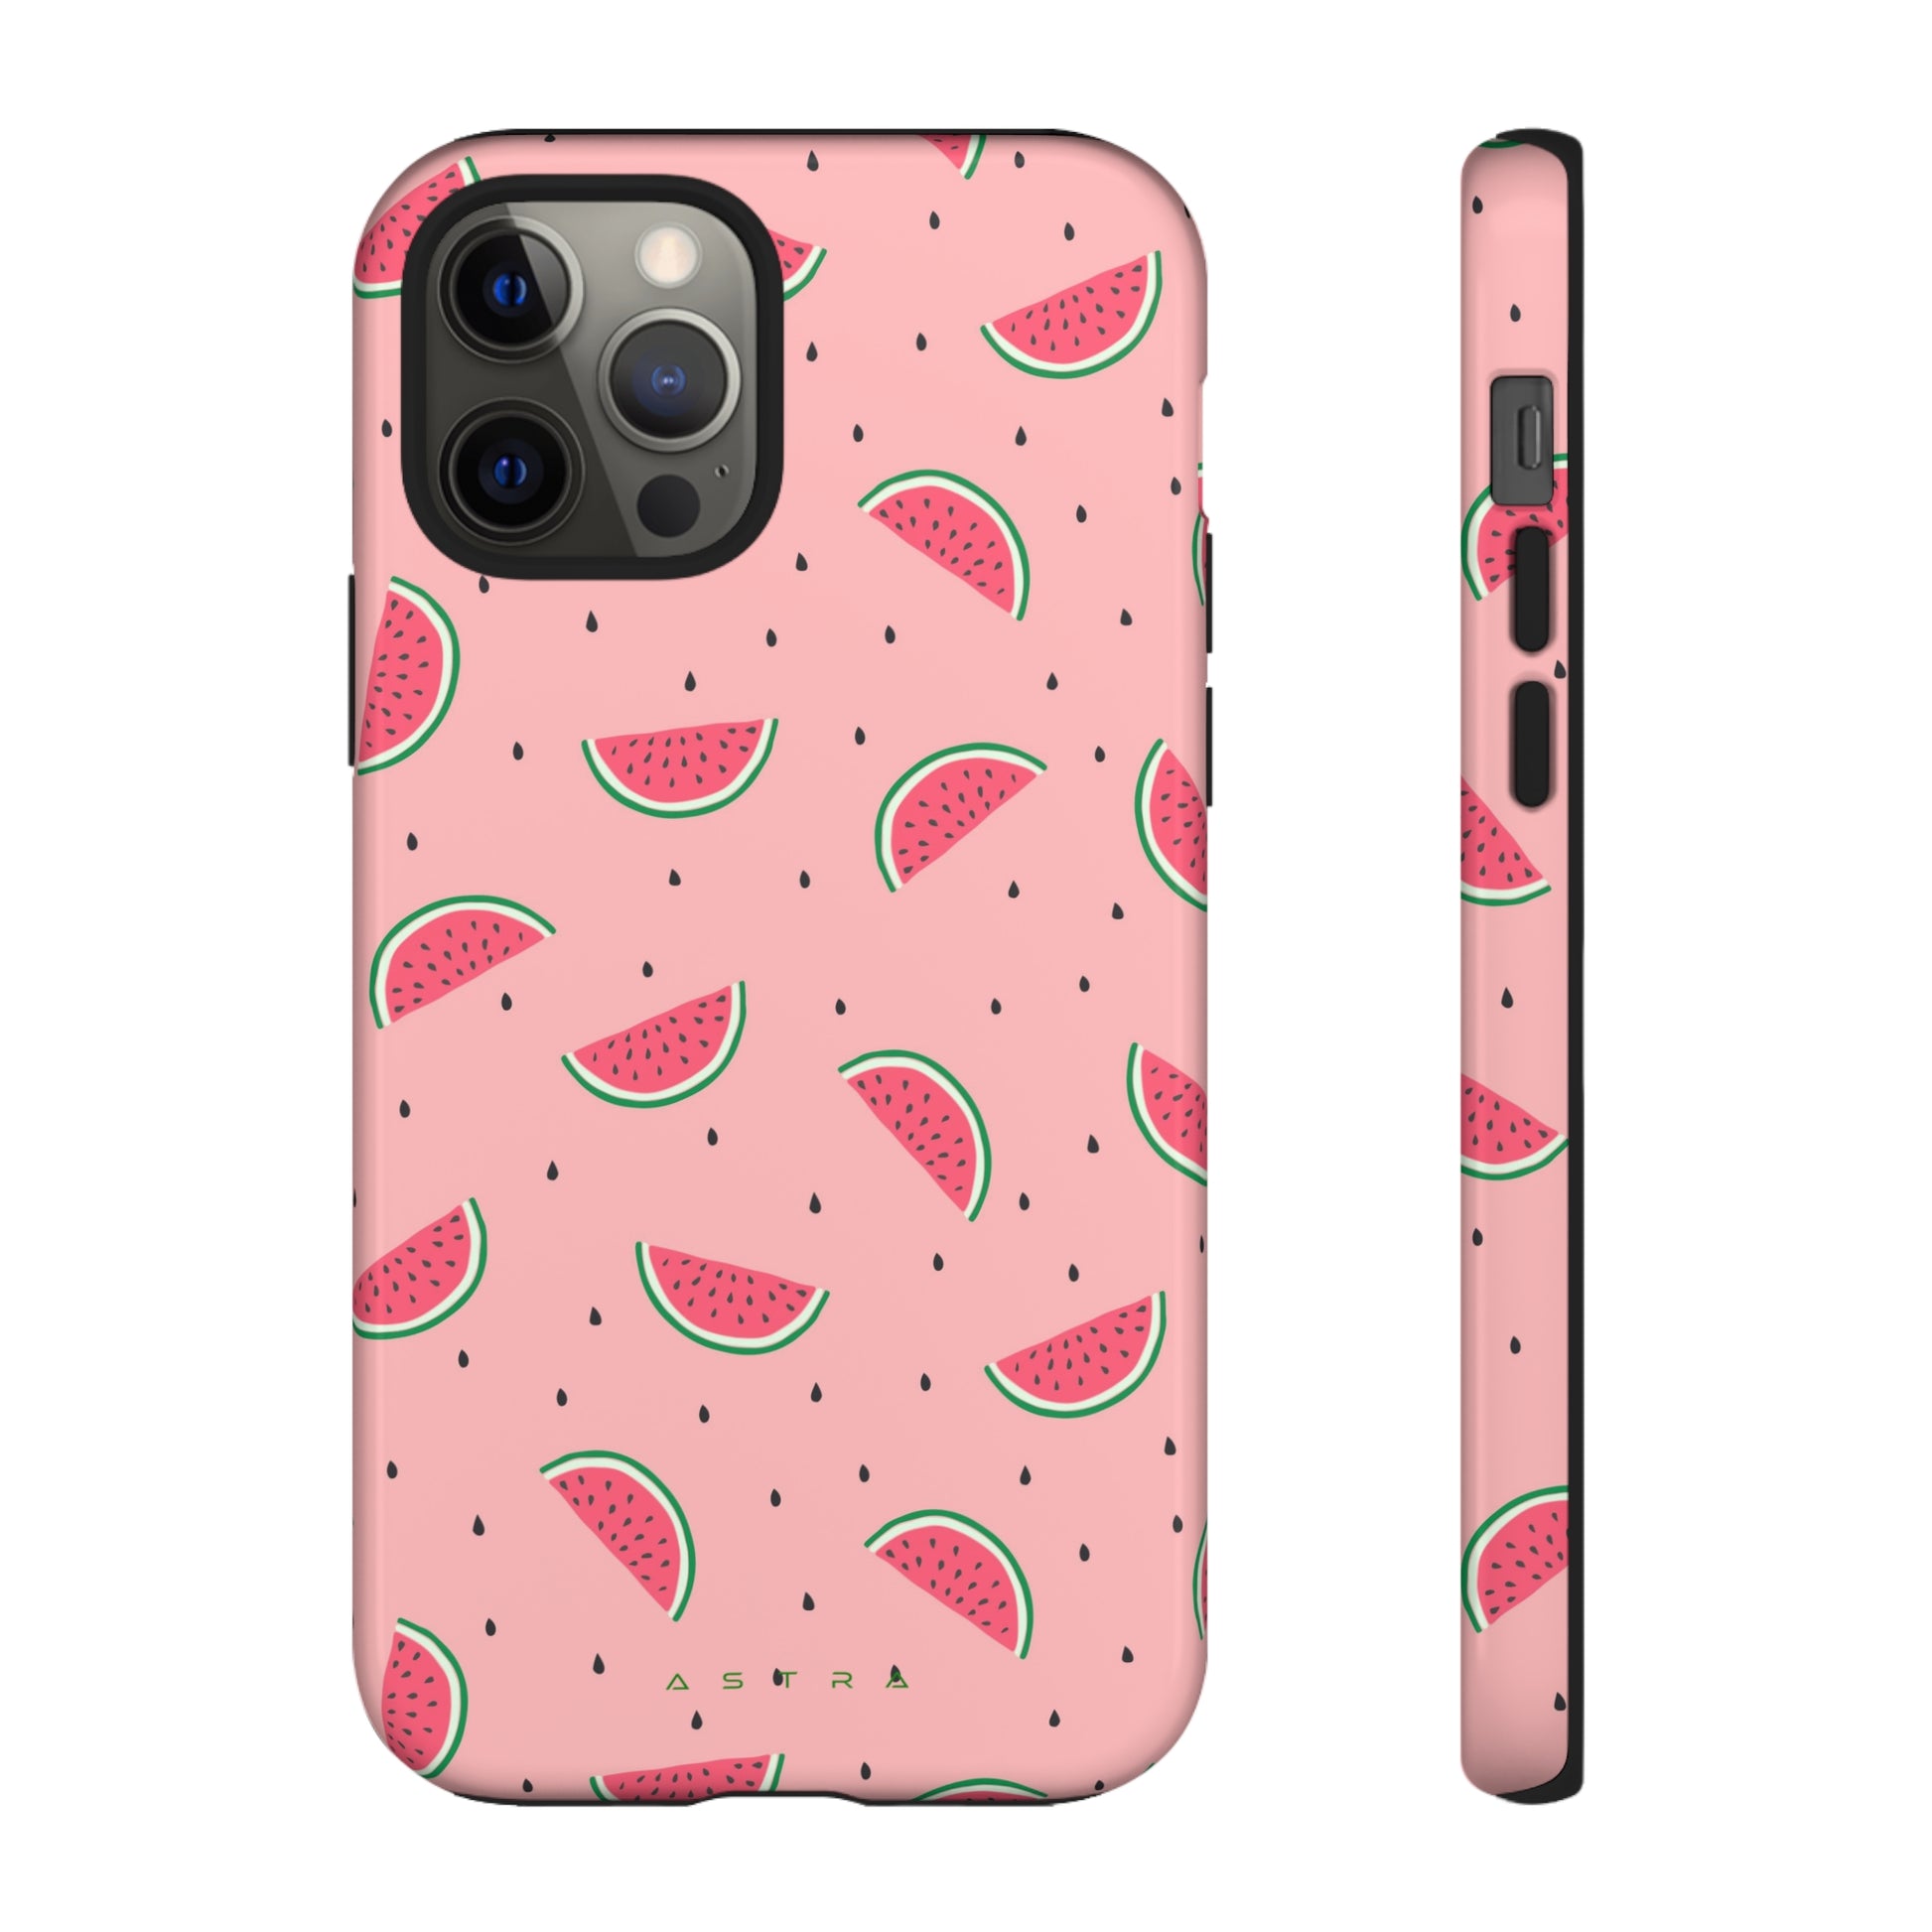 Summer Refresh iPhone 12 Pro Glossy Phone Case Accessories Elite Glossy iPhone Cases Matte mobi Phone accessory Phone Cases Samsung Cases Valentine's Day Picks